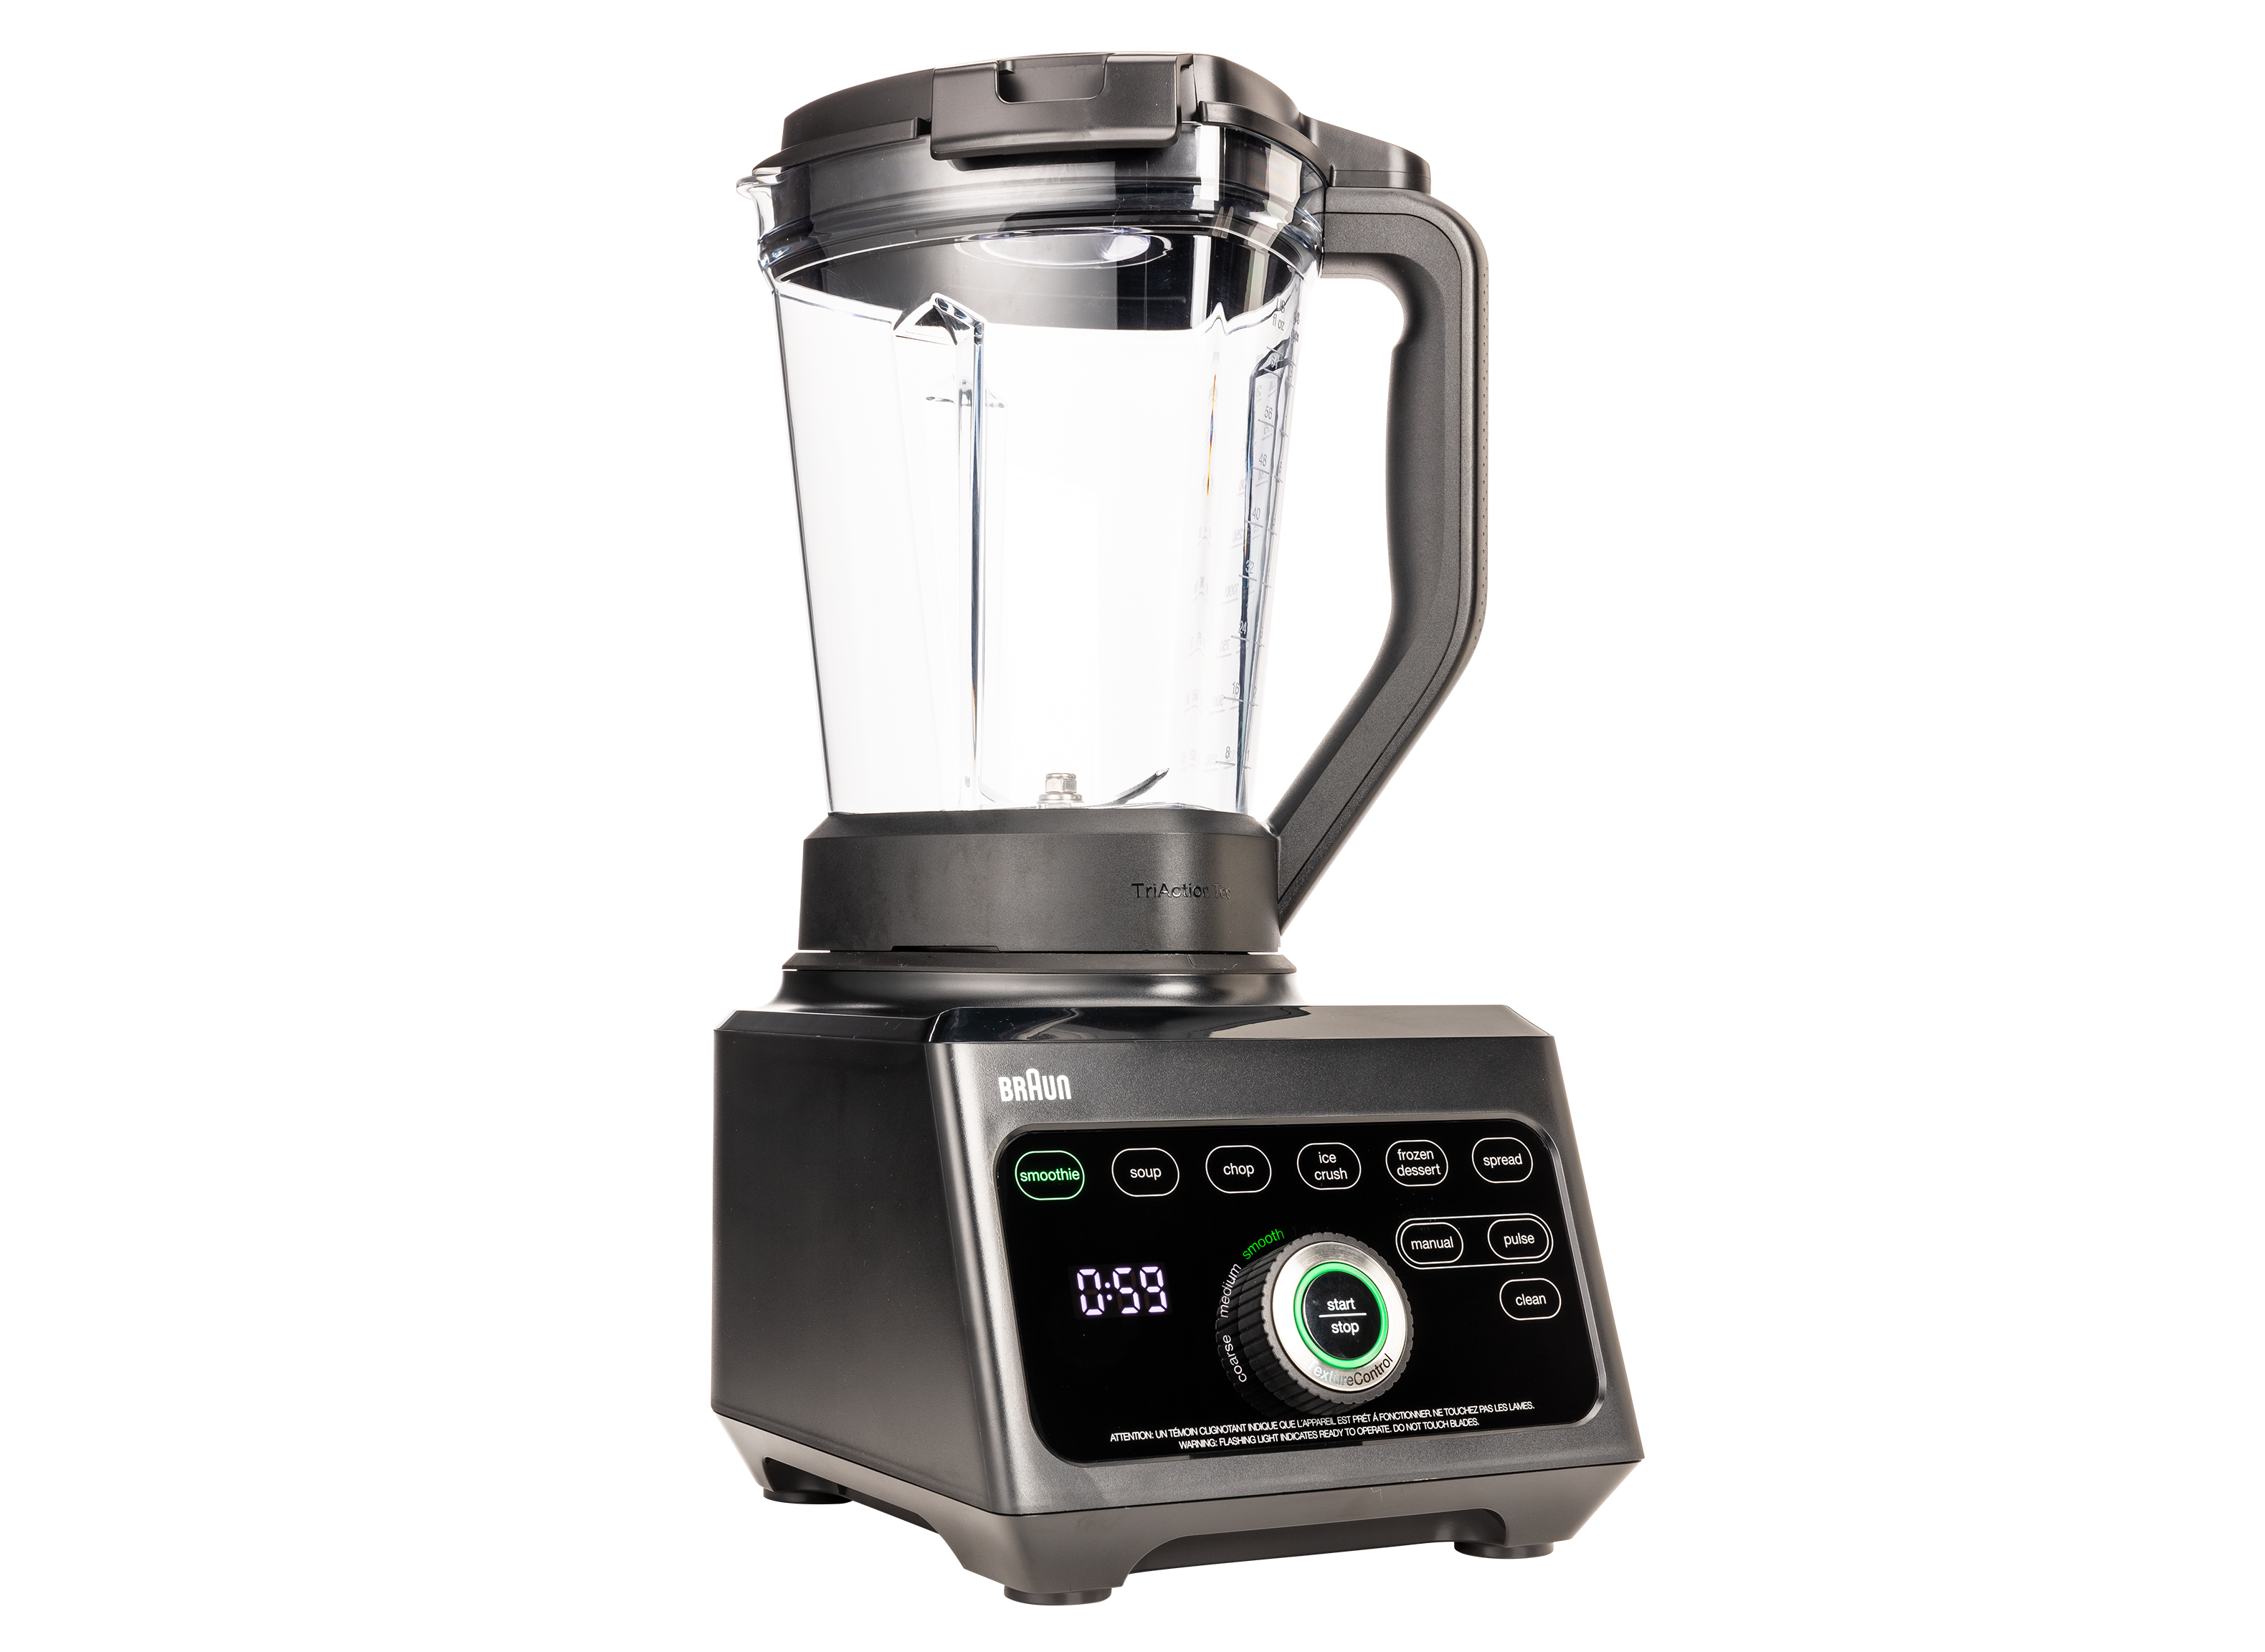 My Braun blender - product review